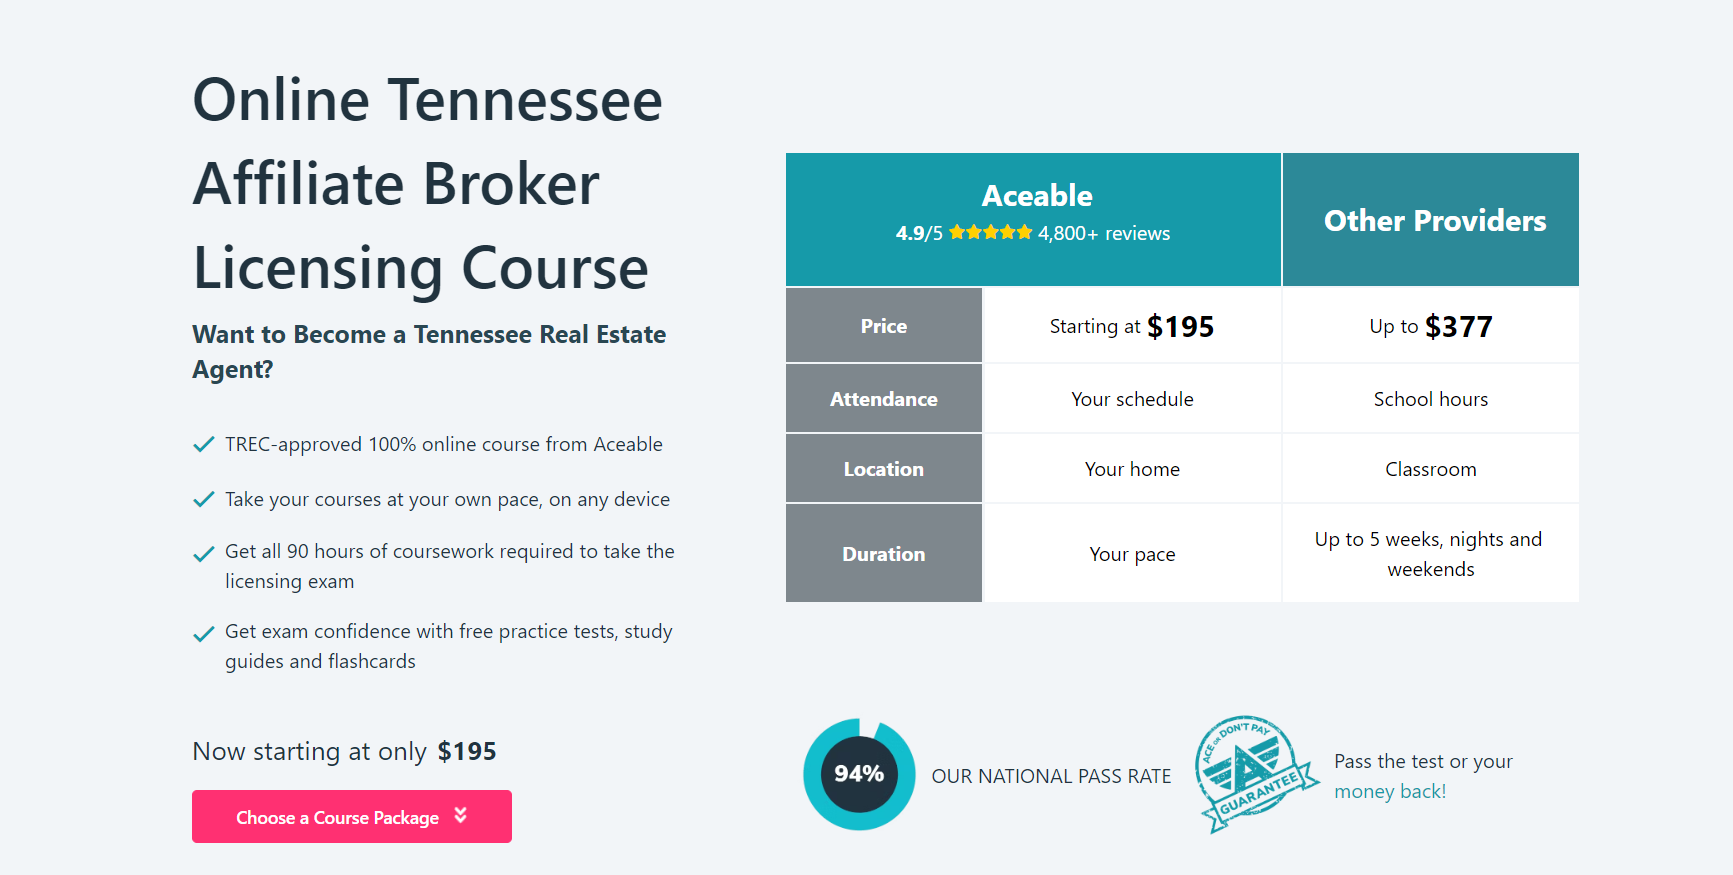 Advertisement for the Online Tennessee Affiliate Broker Licensing Course from AceableAgent.